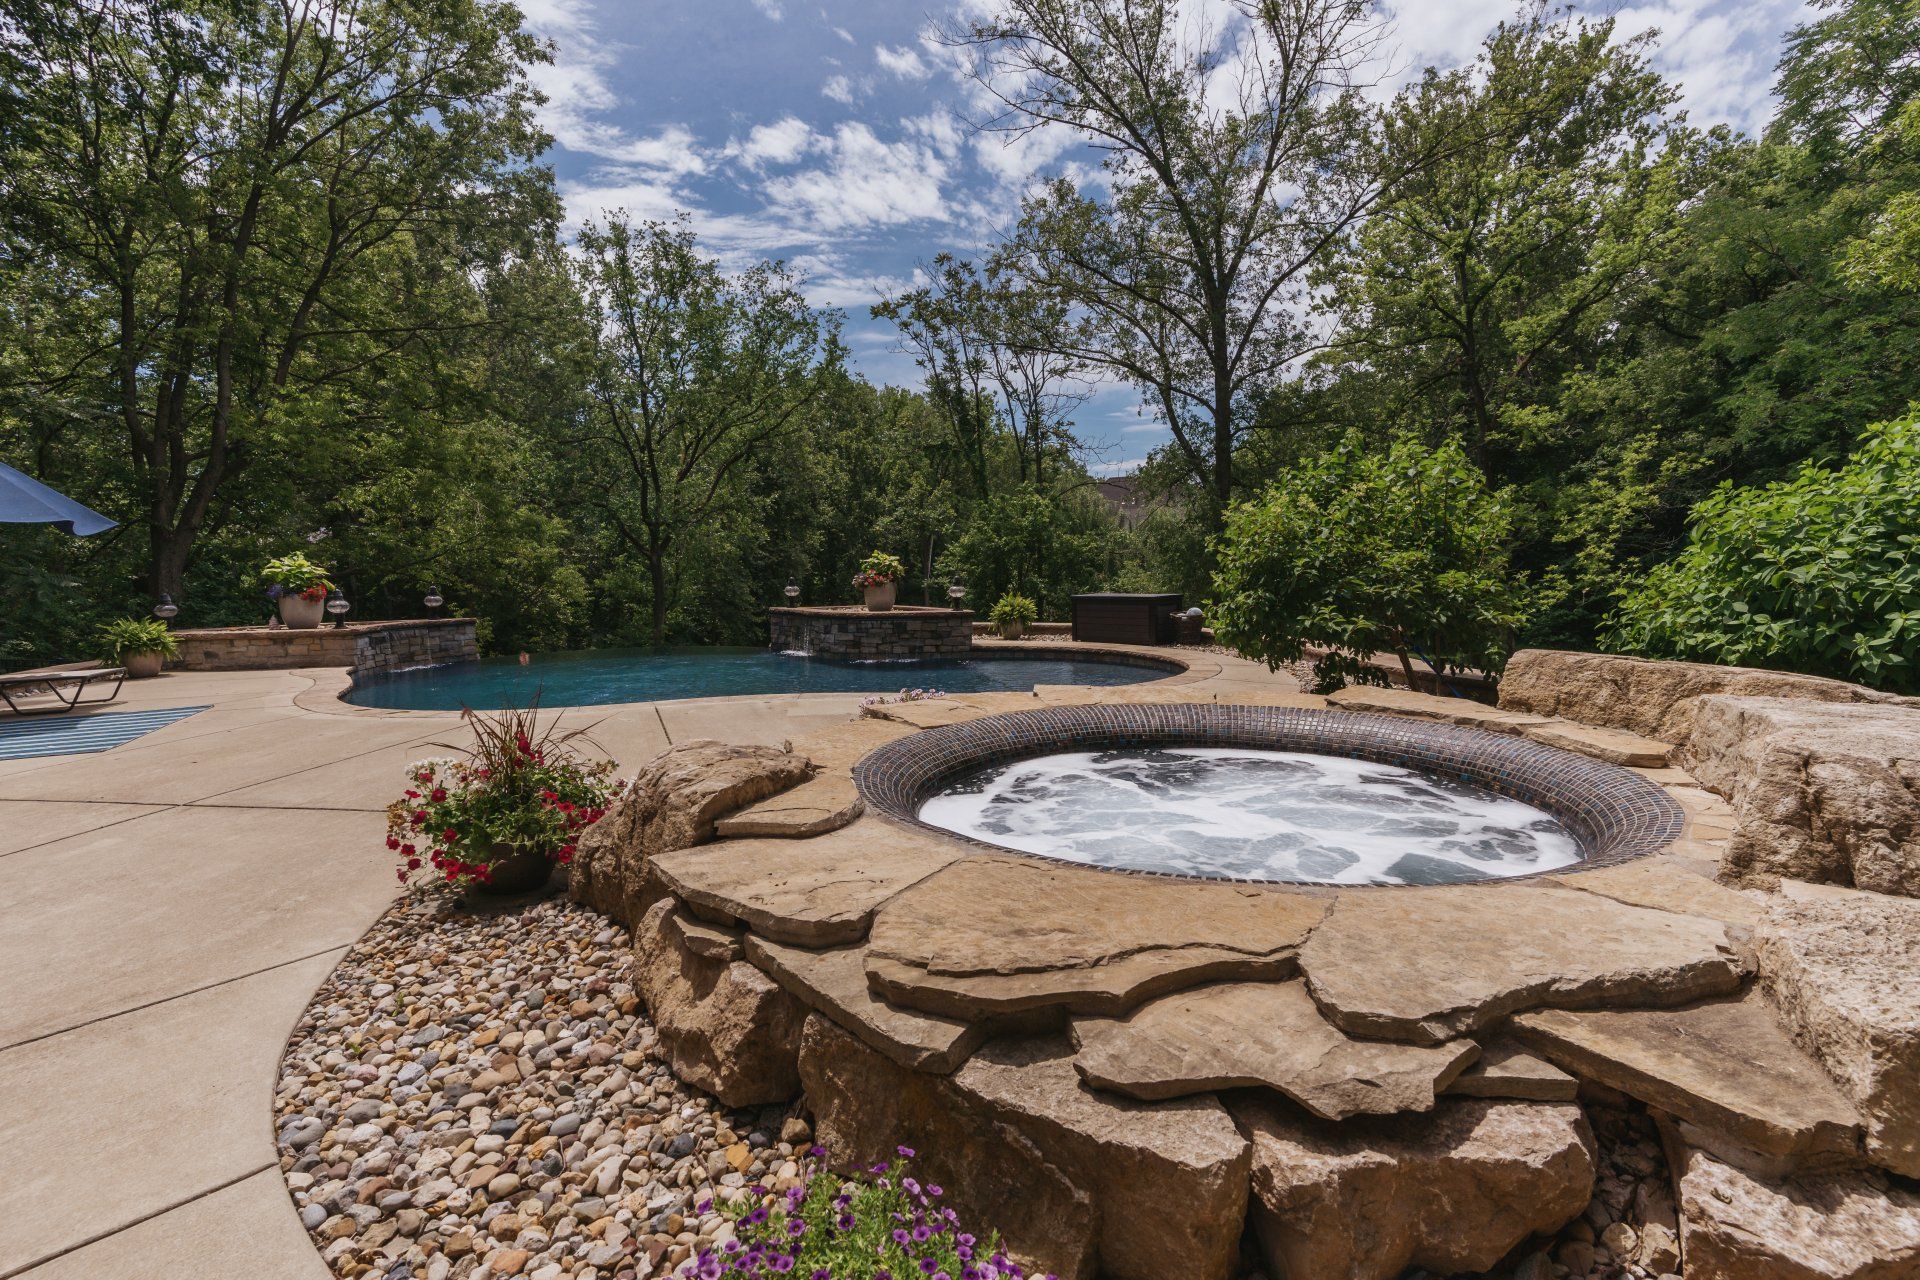 Circular stone spa with jets and bubblers